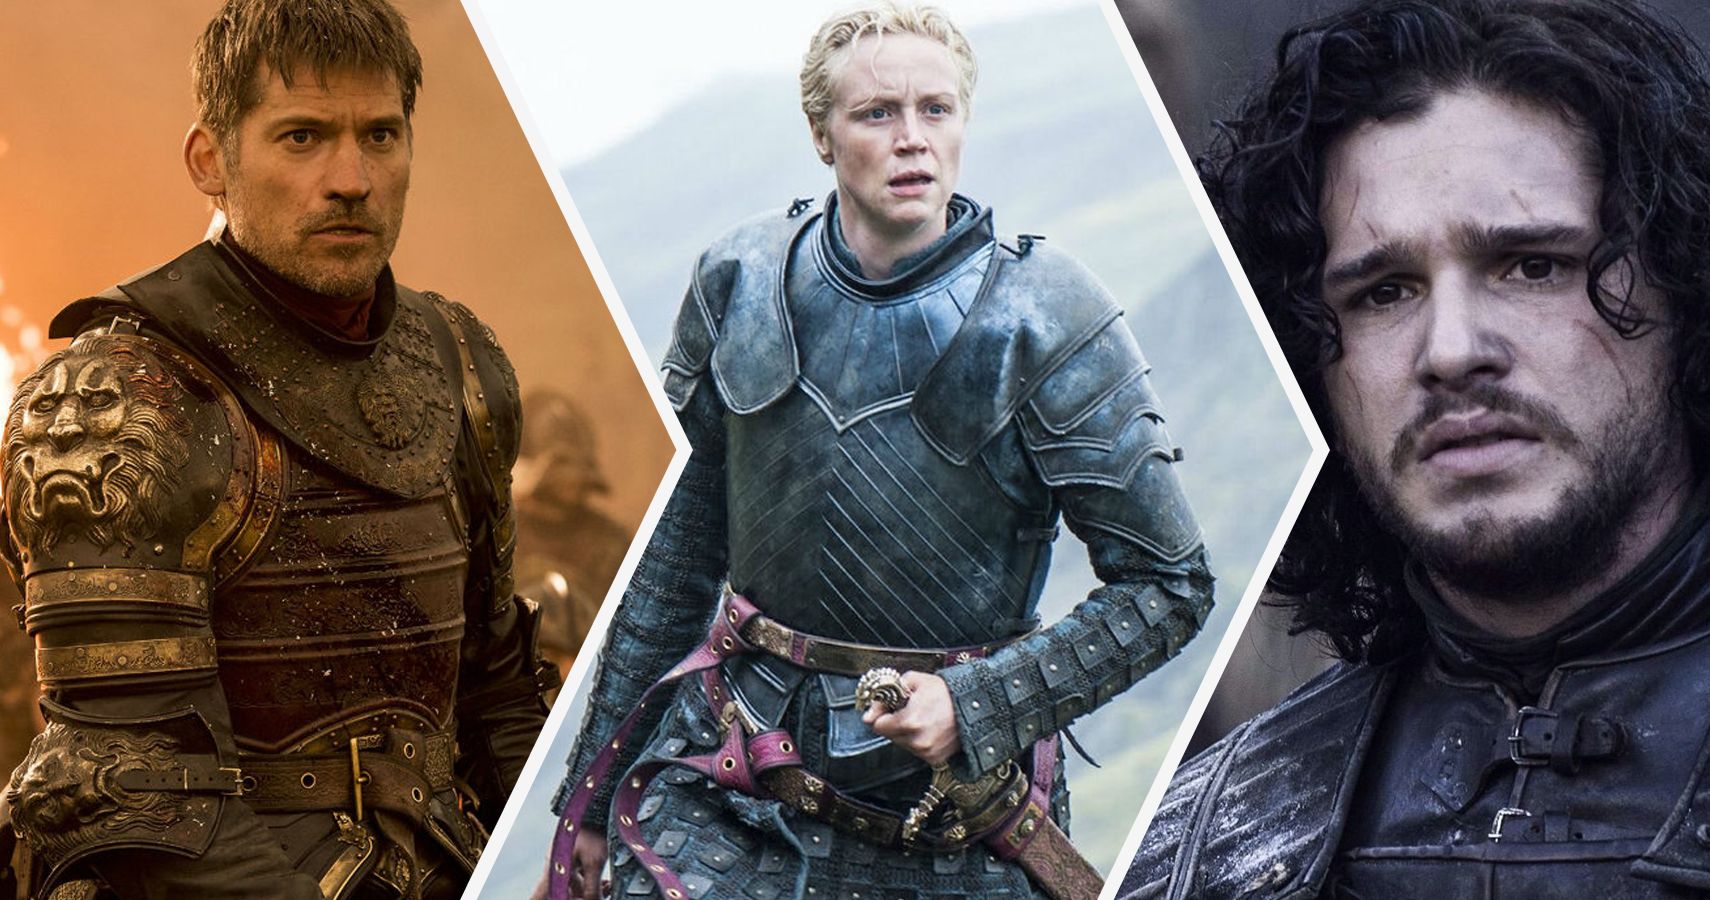 Who is the true hero of Game of Thrones?